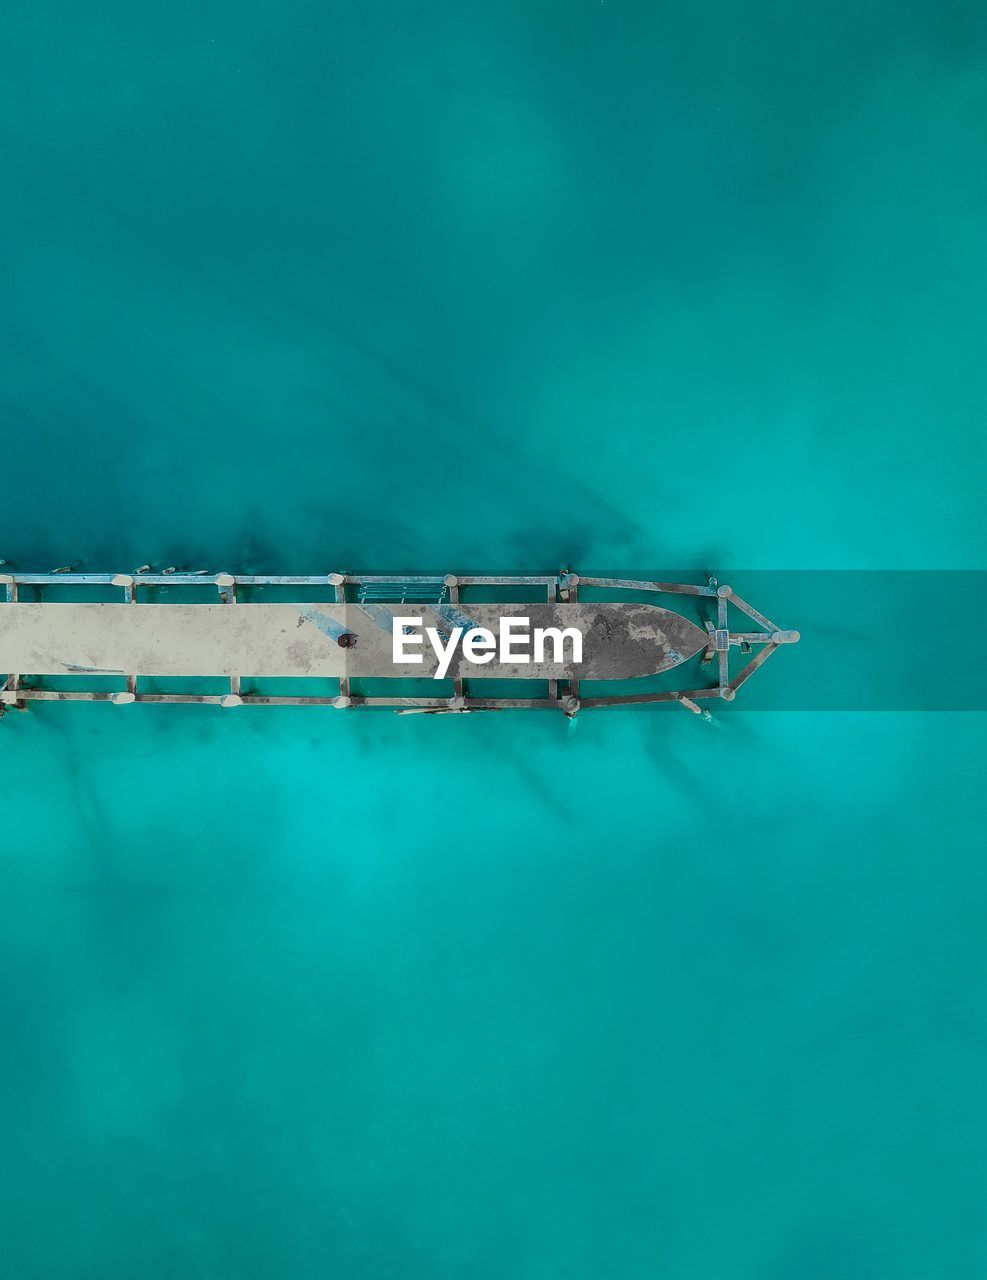 Droneshot of a jetty with turquoise water which is located at koh rong sanloem, cambodia.